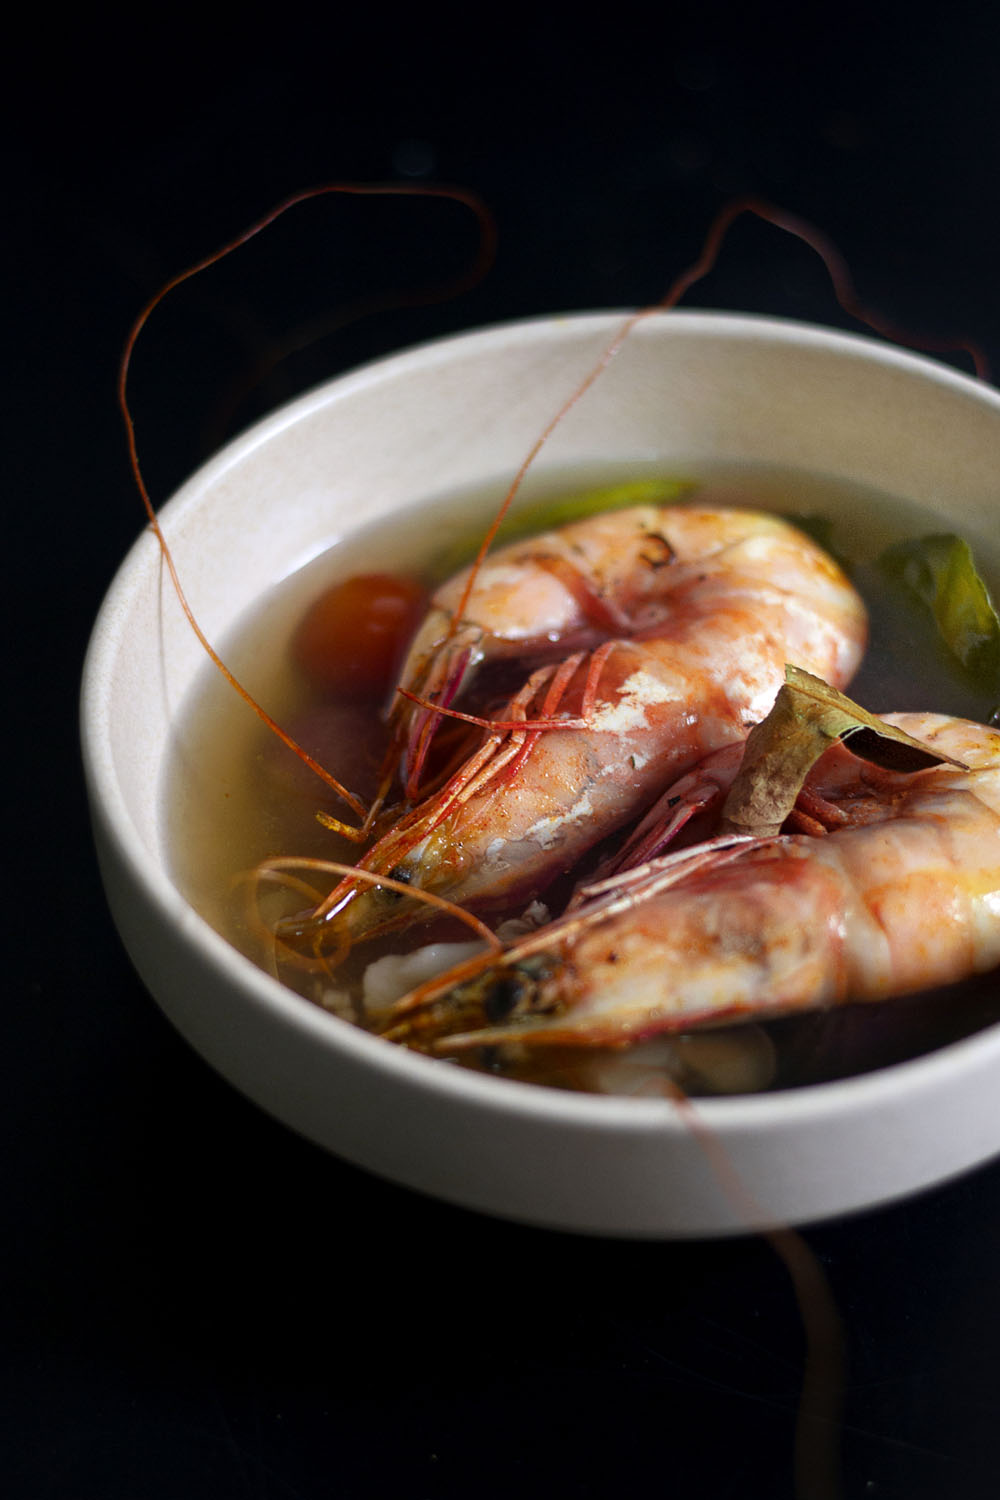 Weekend Kitchen: Tom Yam Soup and Lemongrass Grilled Prawn